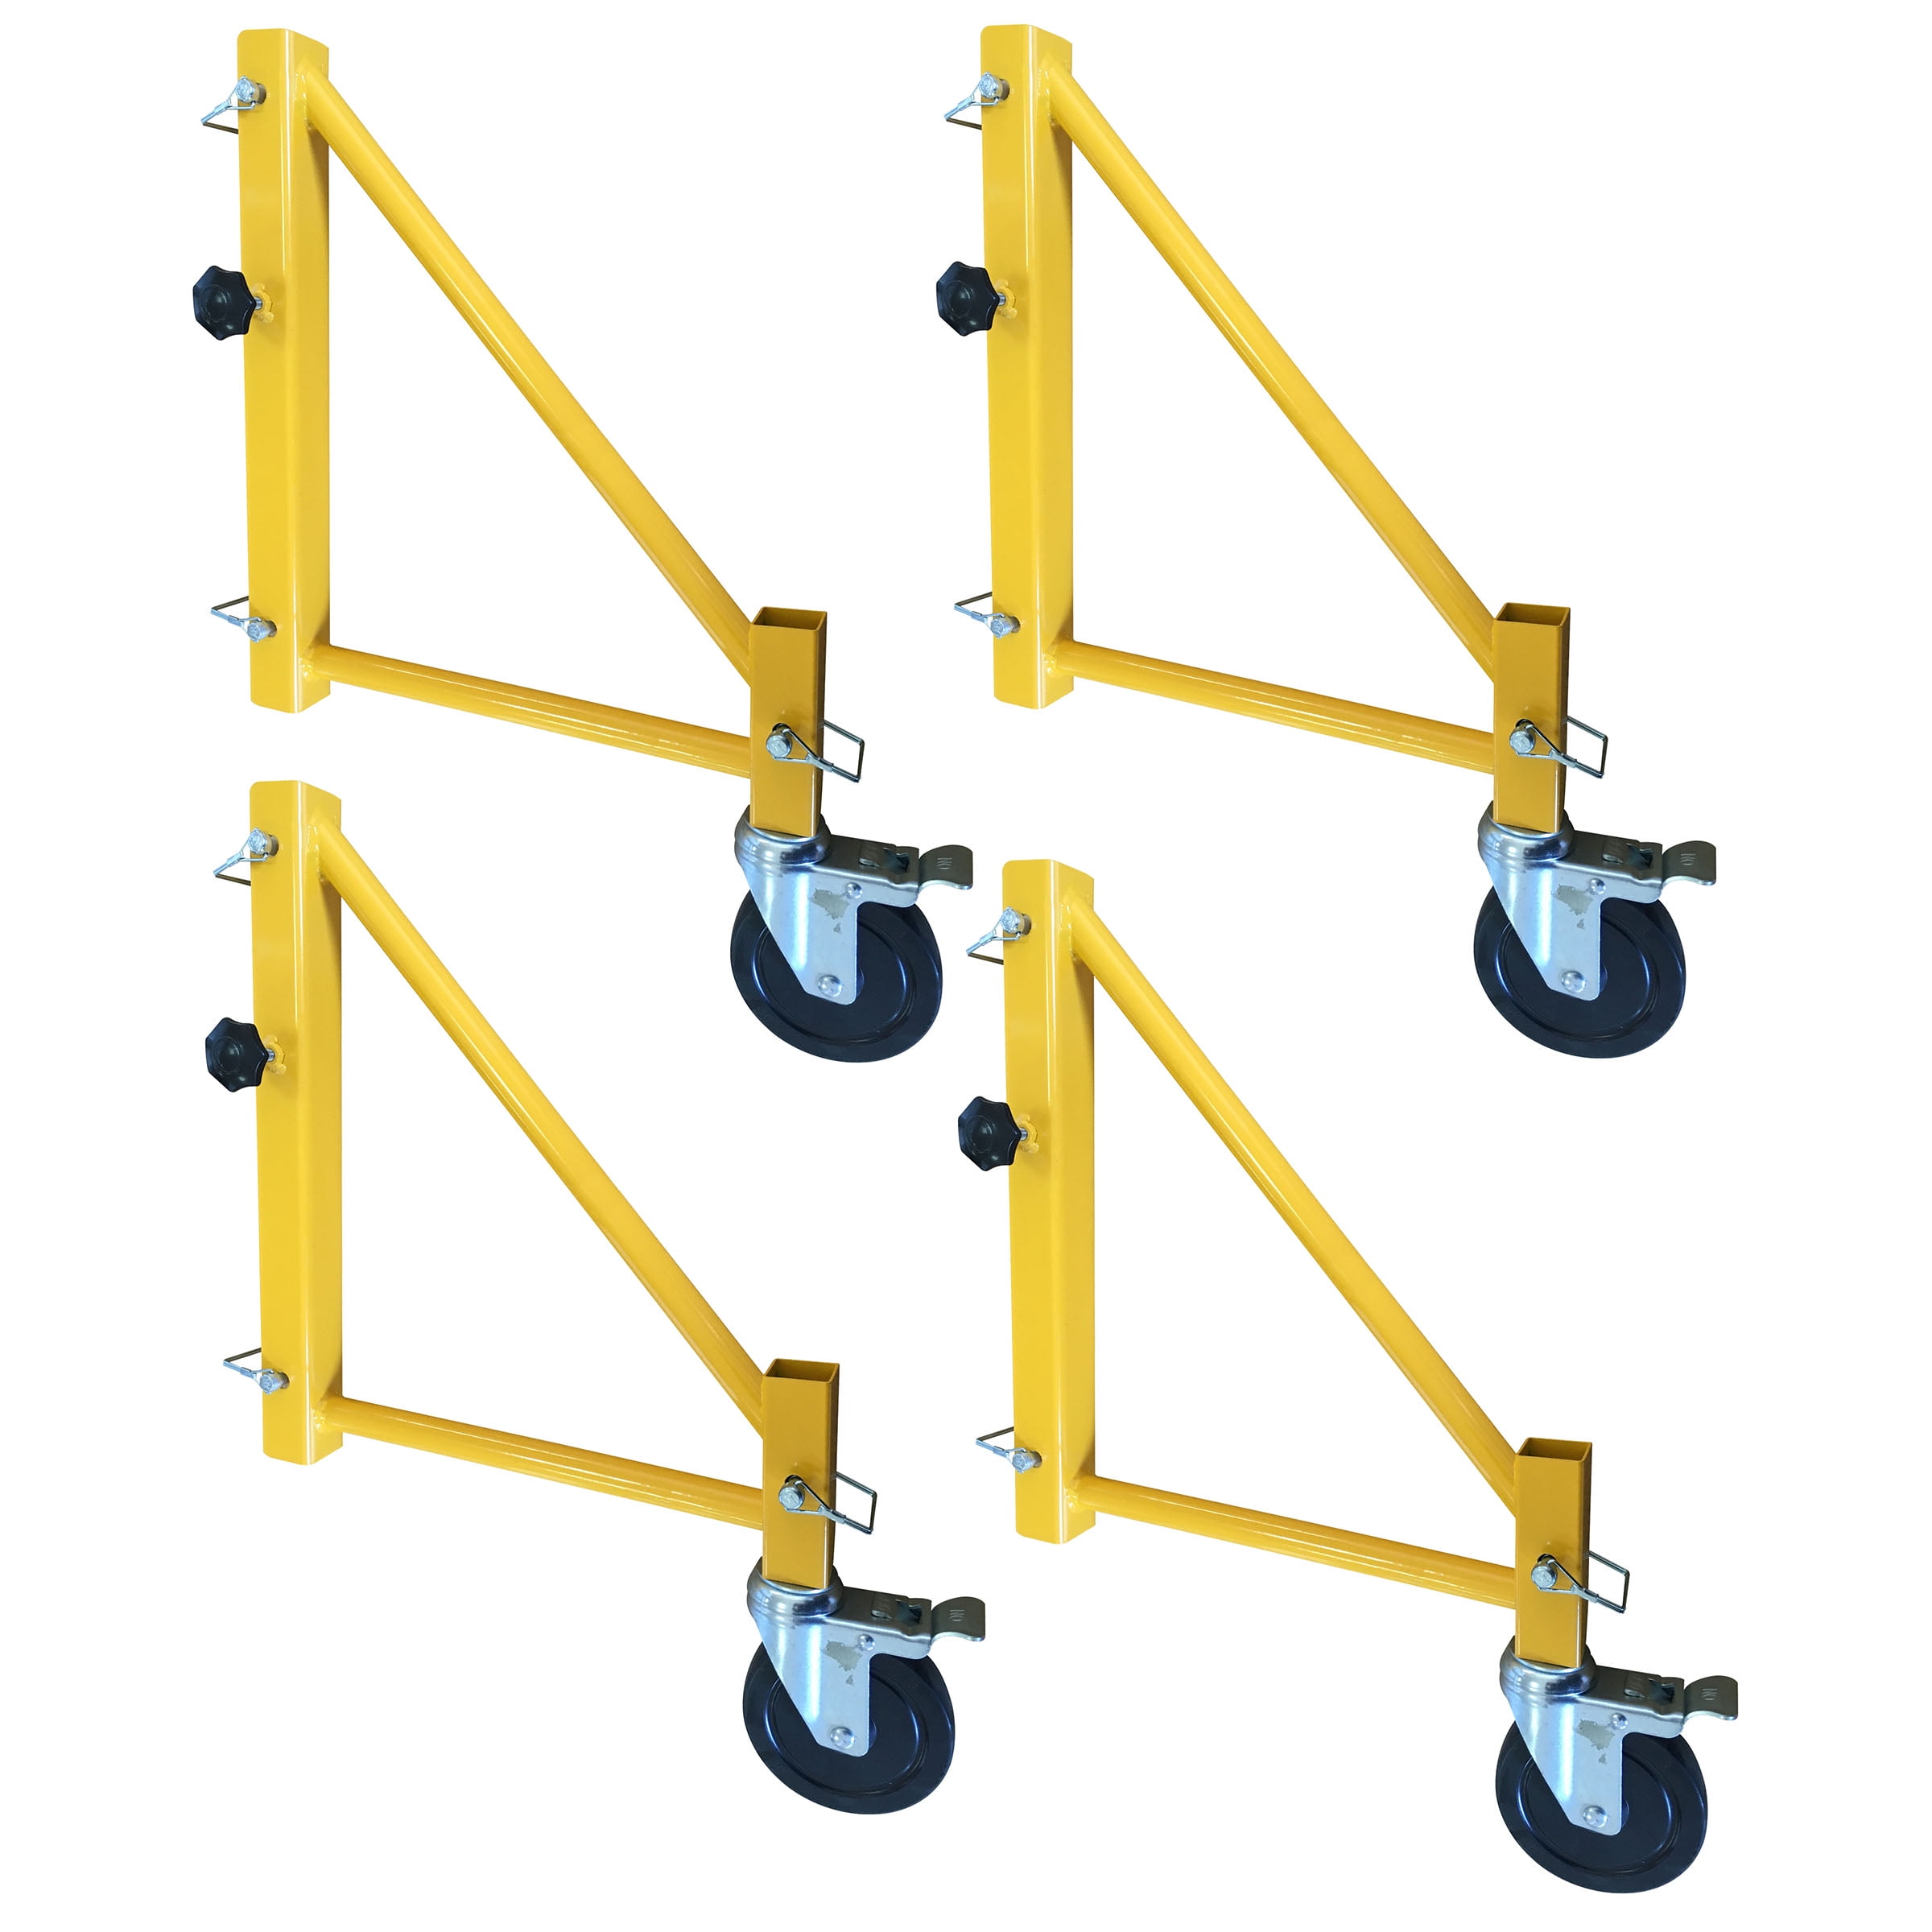 Gsorwcs 18 In. Scaffolding Outriggers With Casters - 4 Piece